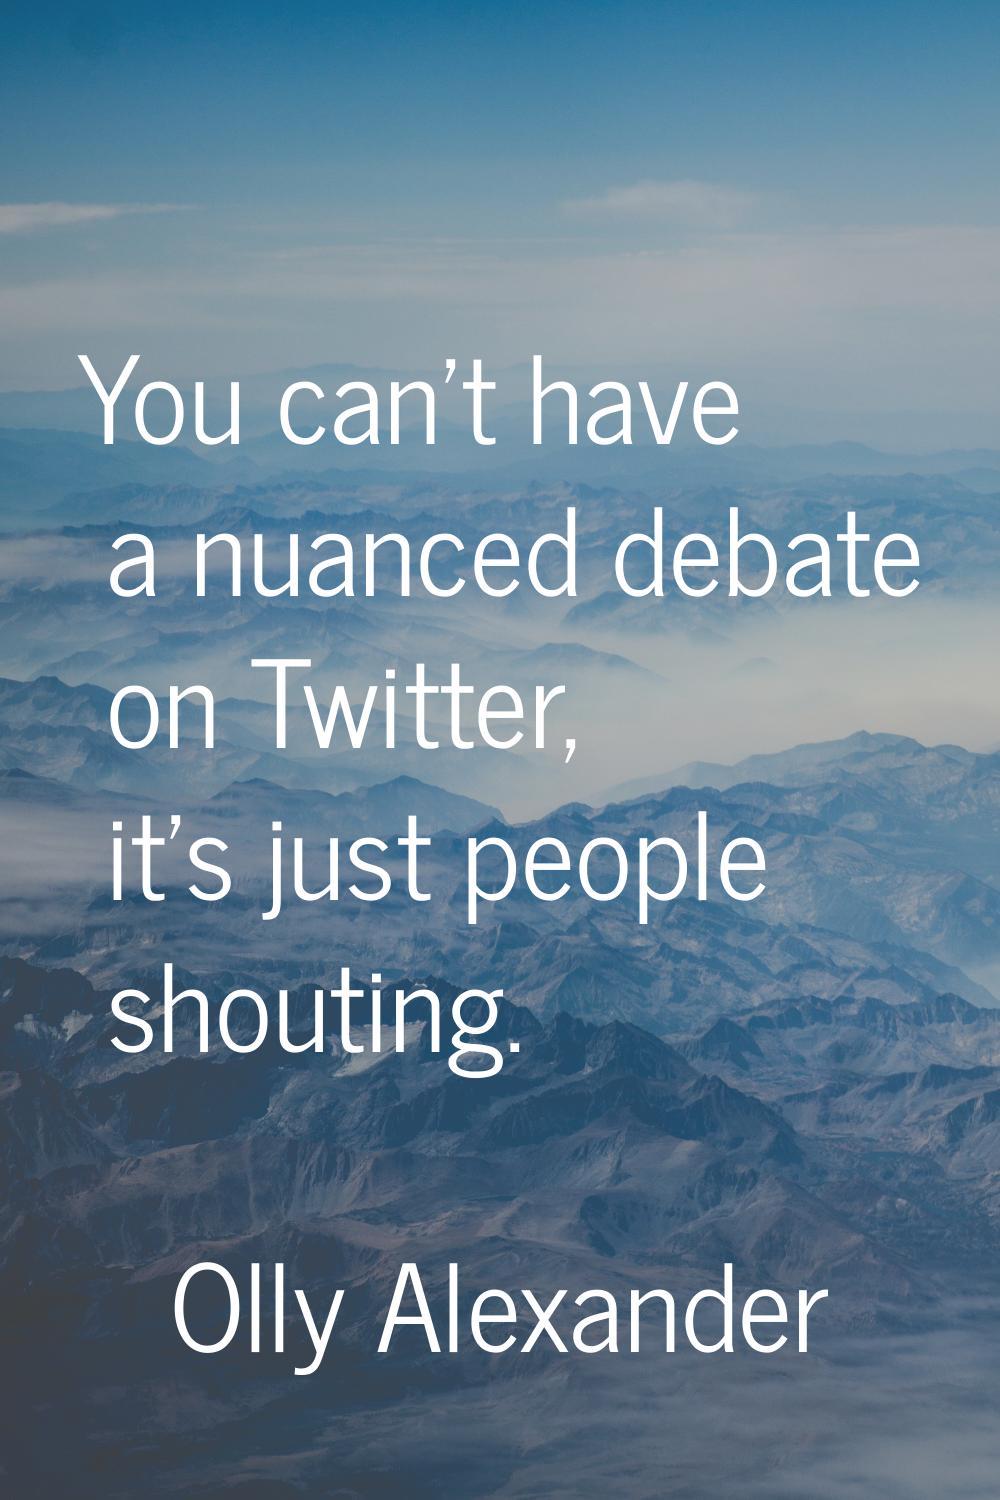 You can't have a nuanced debate on Twitter, it's just people shouting.